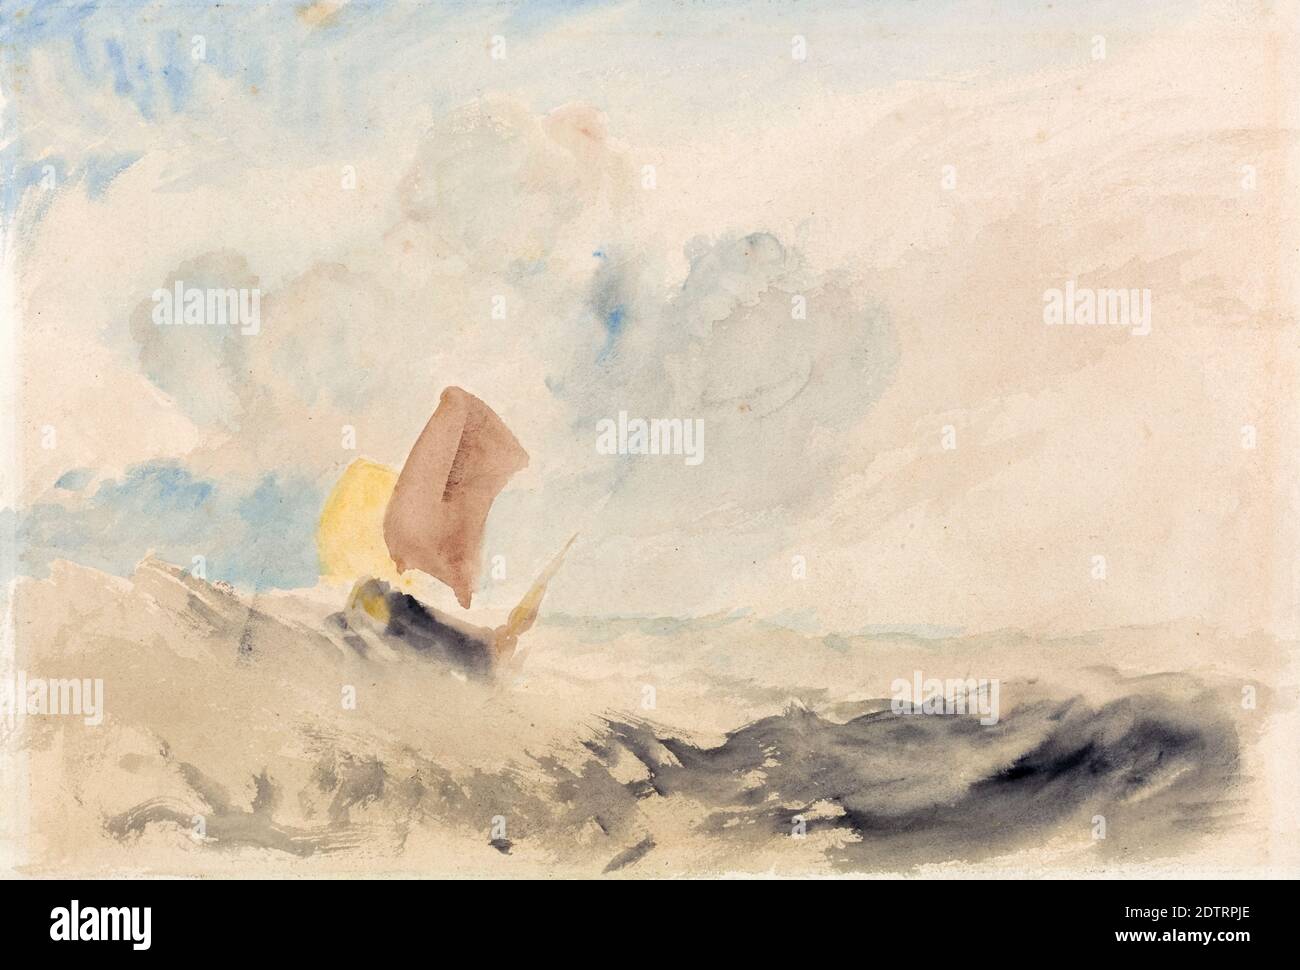 JMW Turner, A Sea Piece: A Rough Sea with a Fishing Boat, landscape painting, 1820-1830 Stock Photo